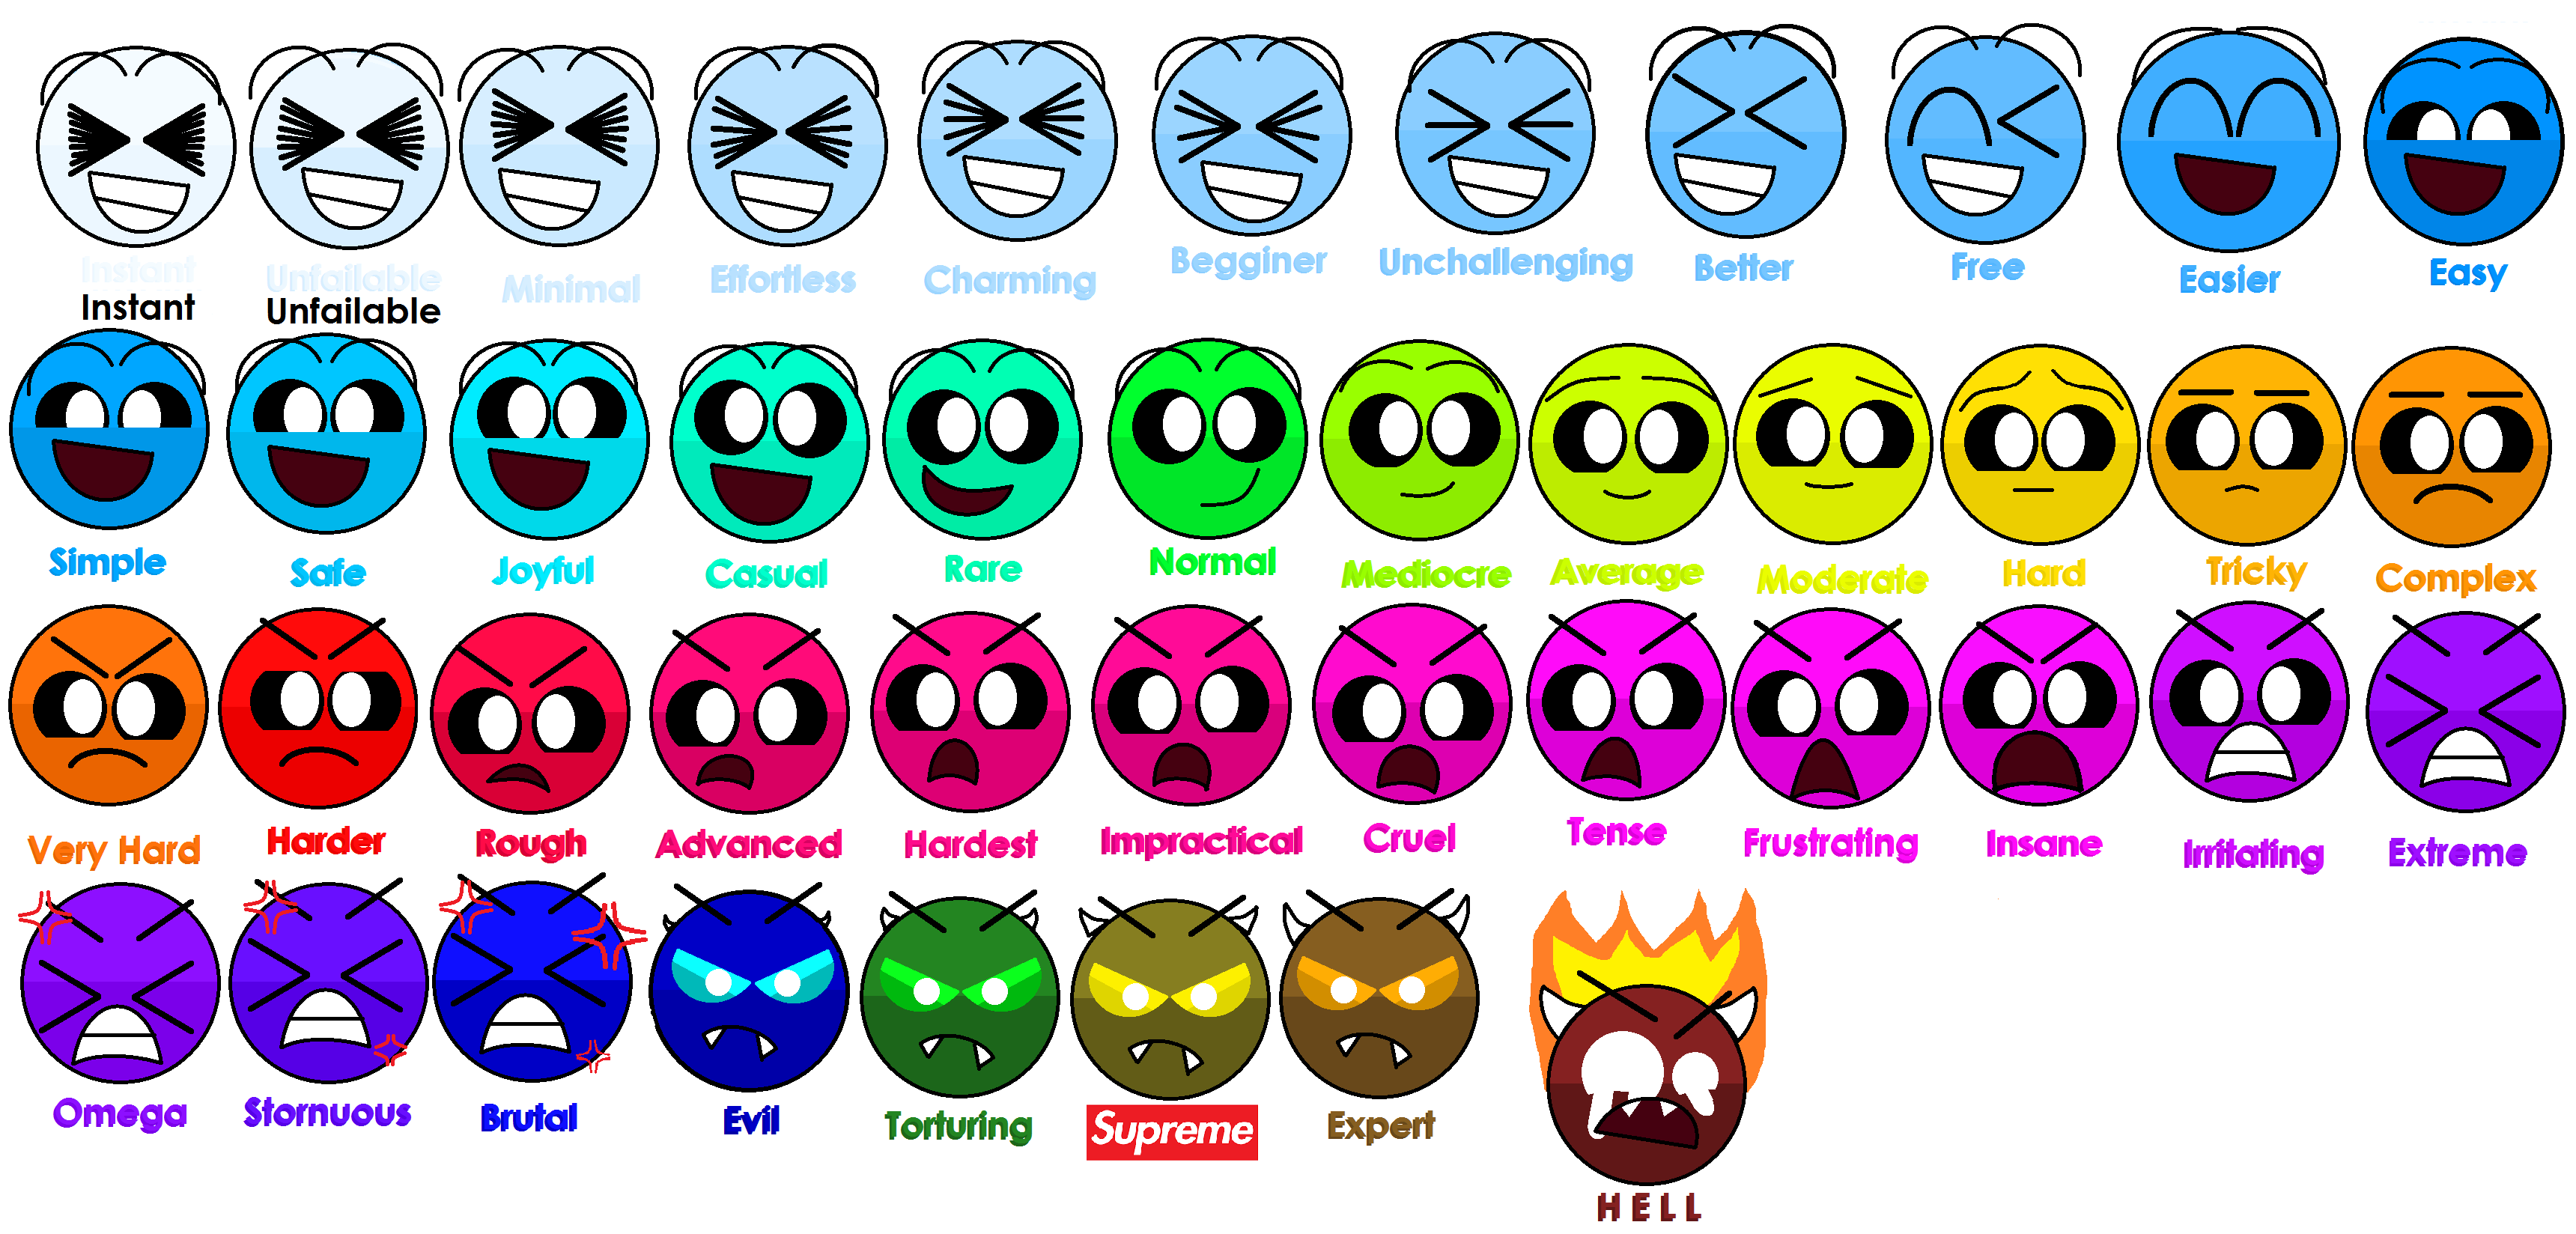 GD Difficulty Faces Names - Imgflip